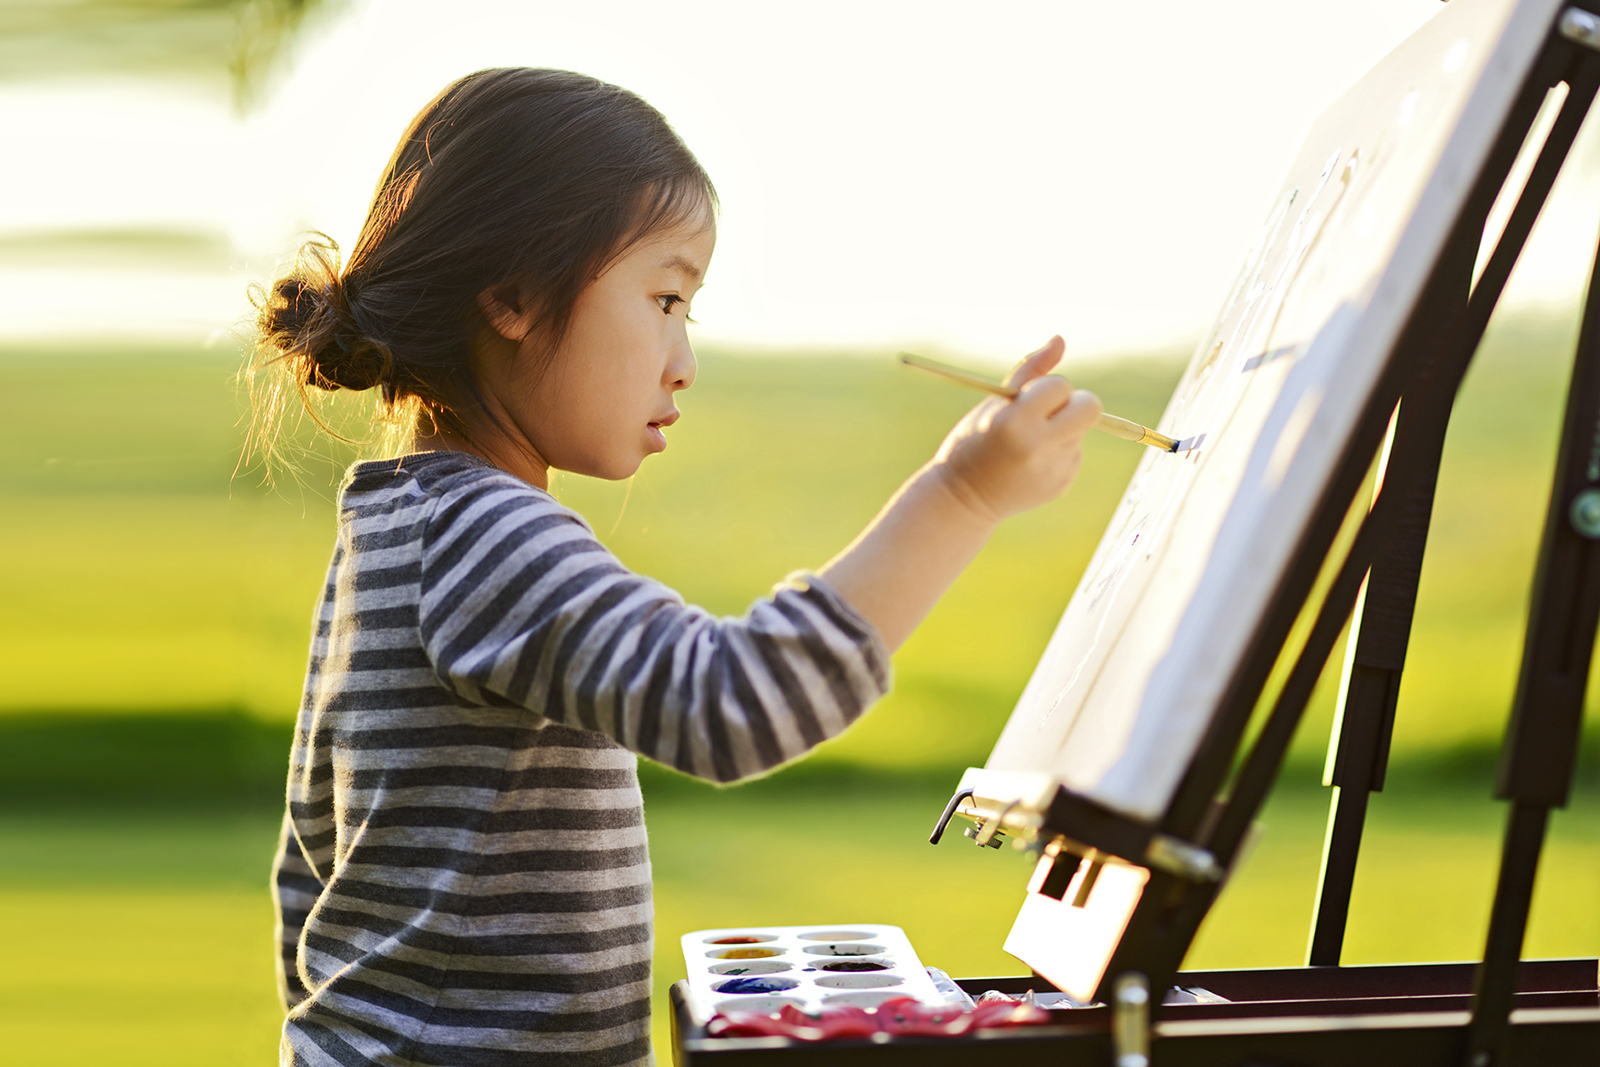 The young artist